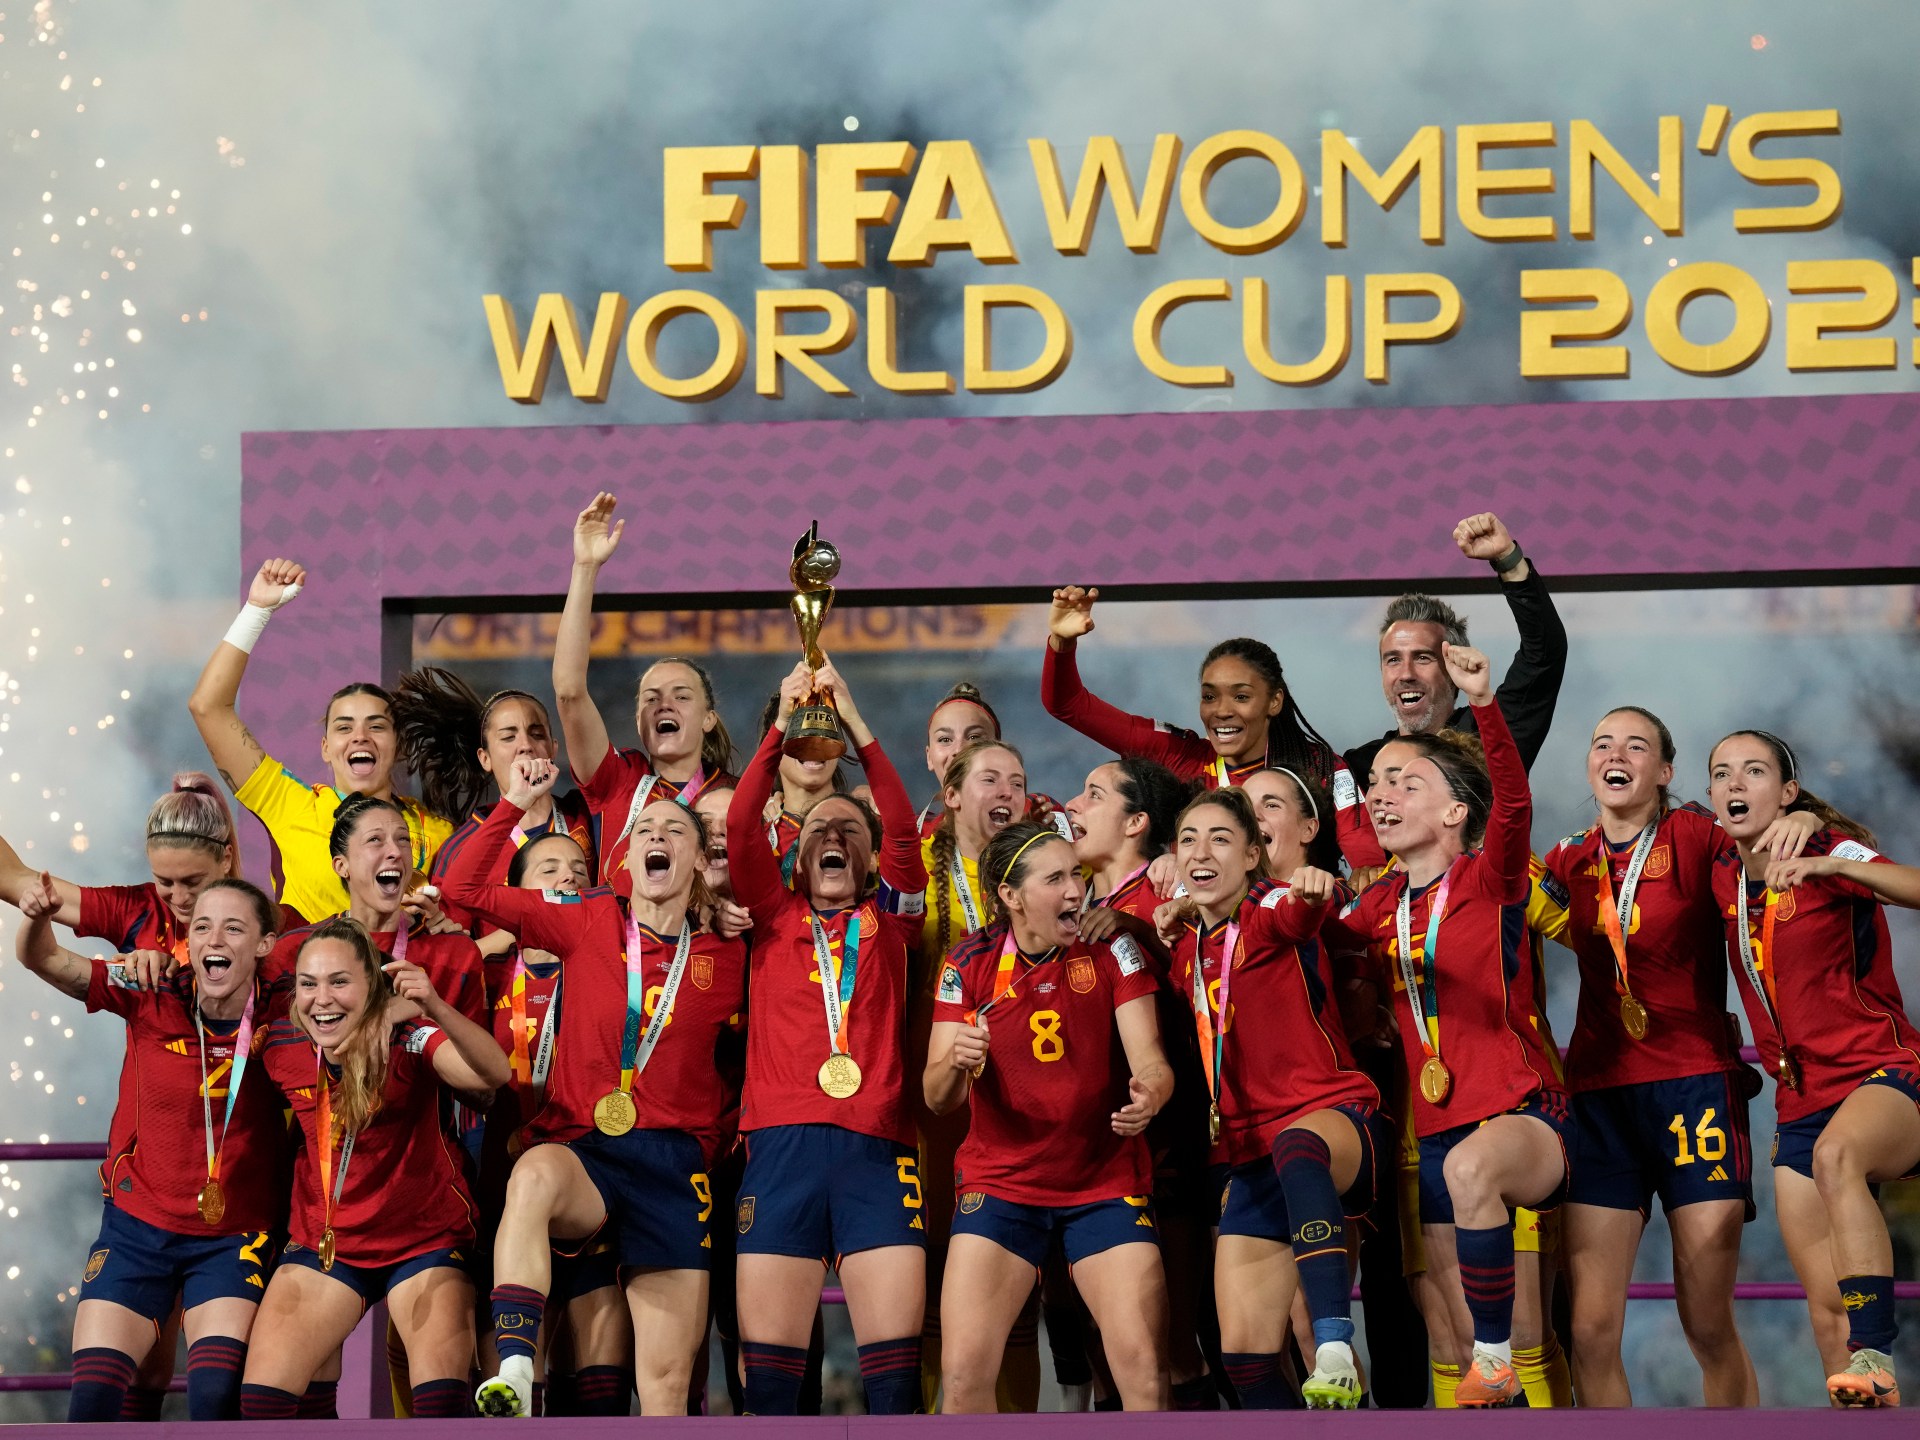 United States and Mexico launch joint bid for 2027 Women’s World Cup | Women’s World Cup News #United #States #Mexico #launch #joint #bid #Womens #World #Cup #Womens #World #Cup #News